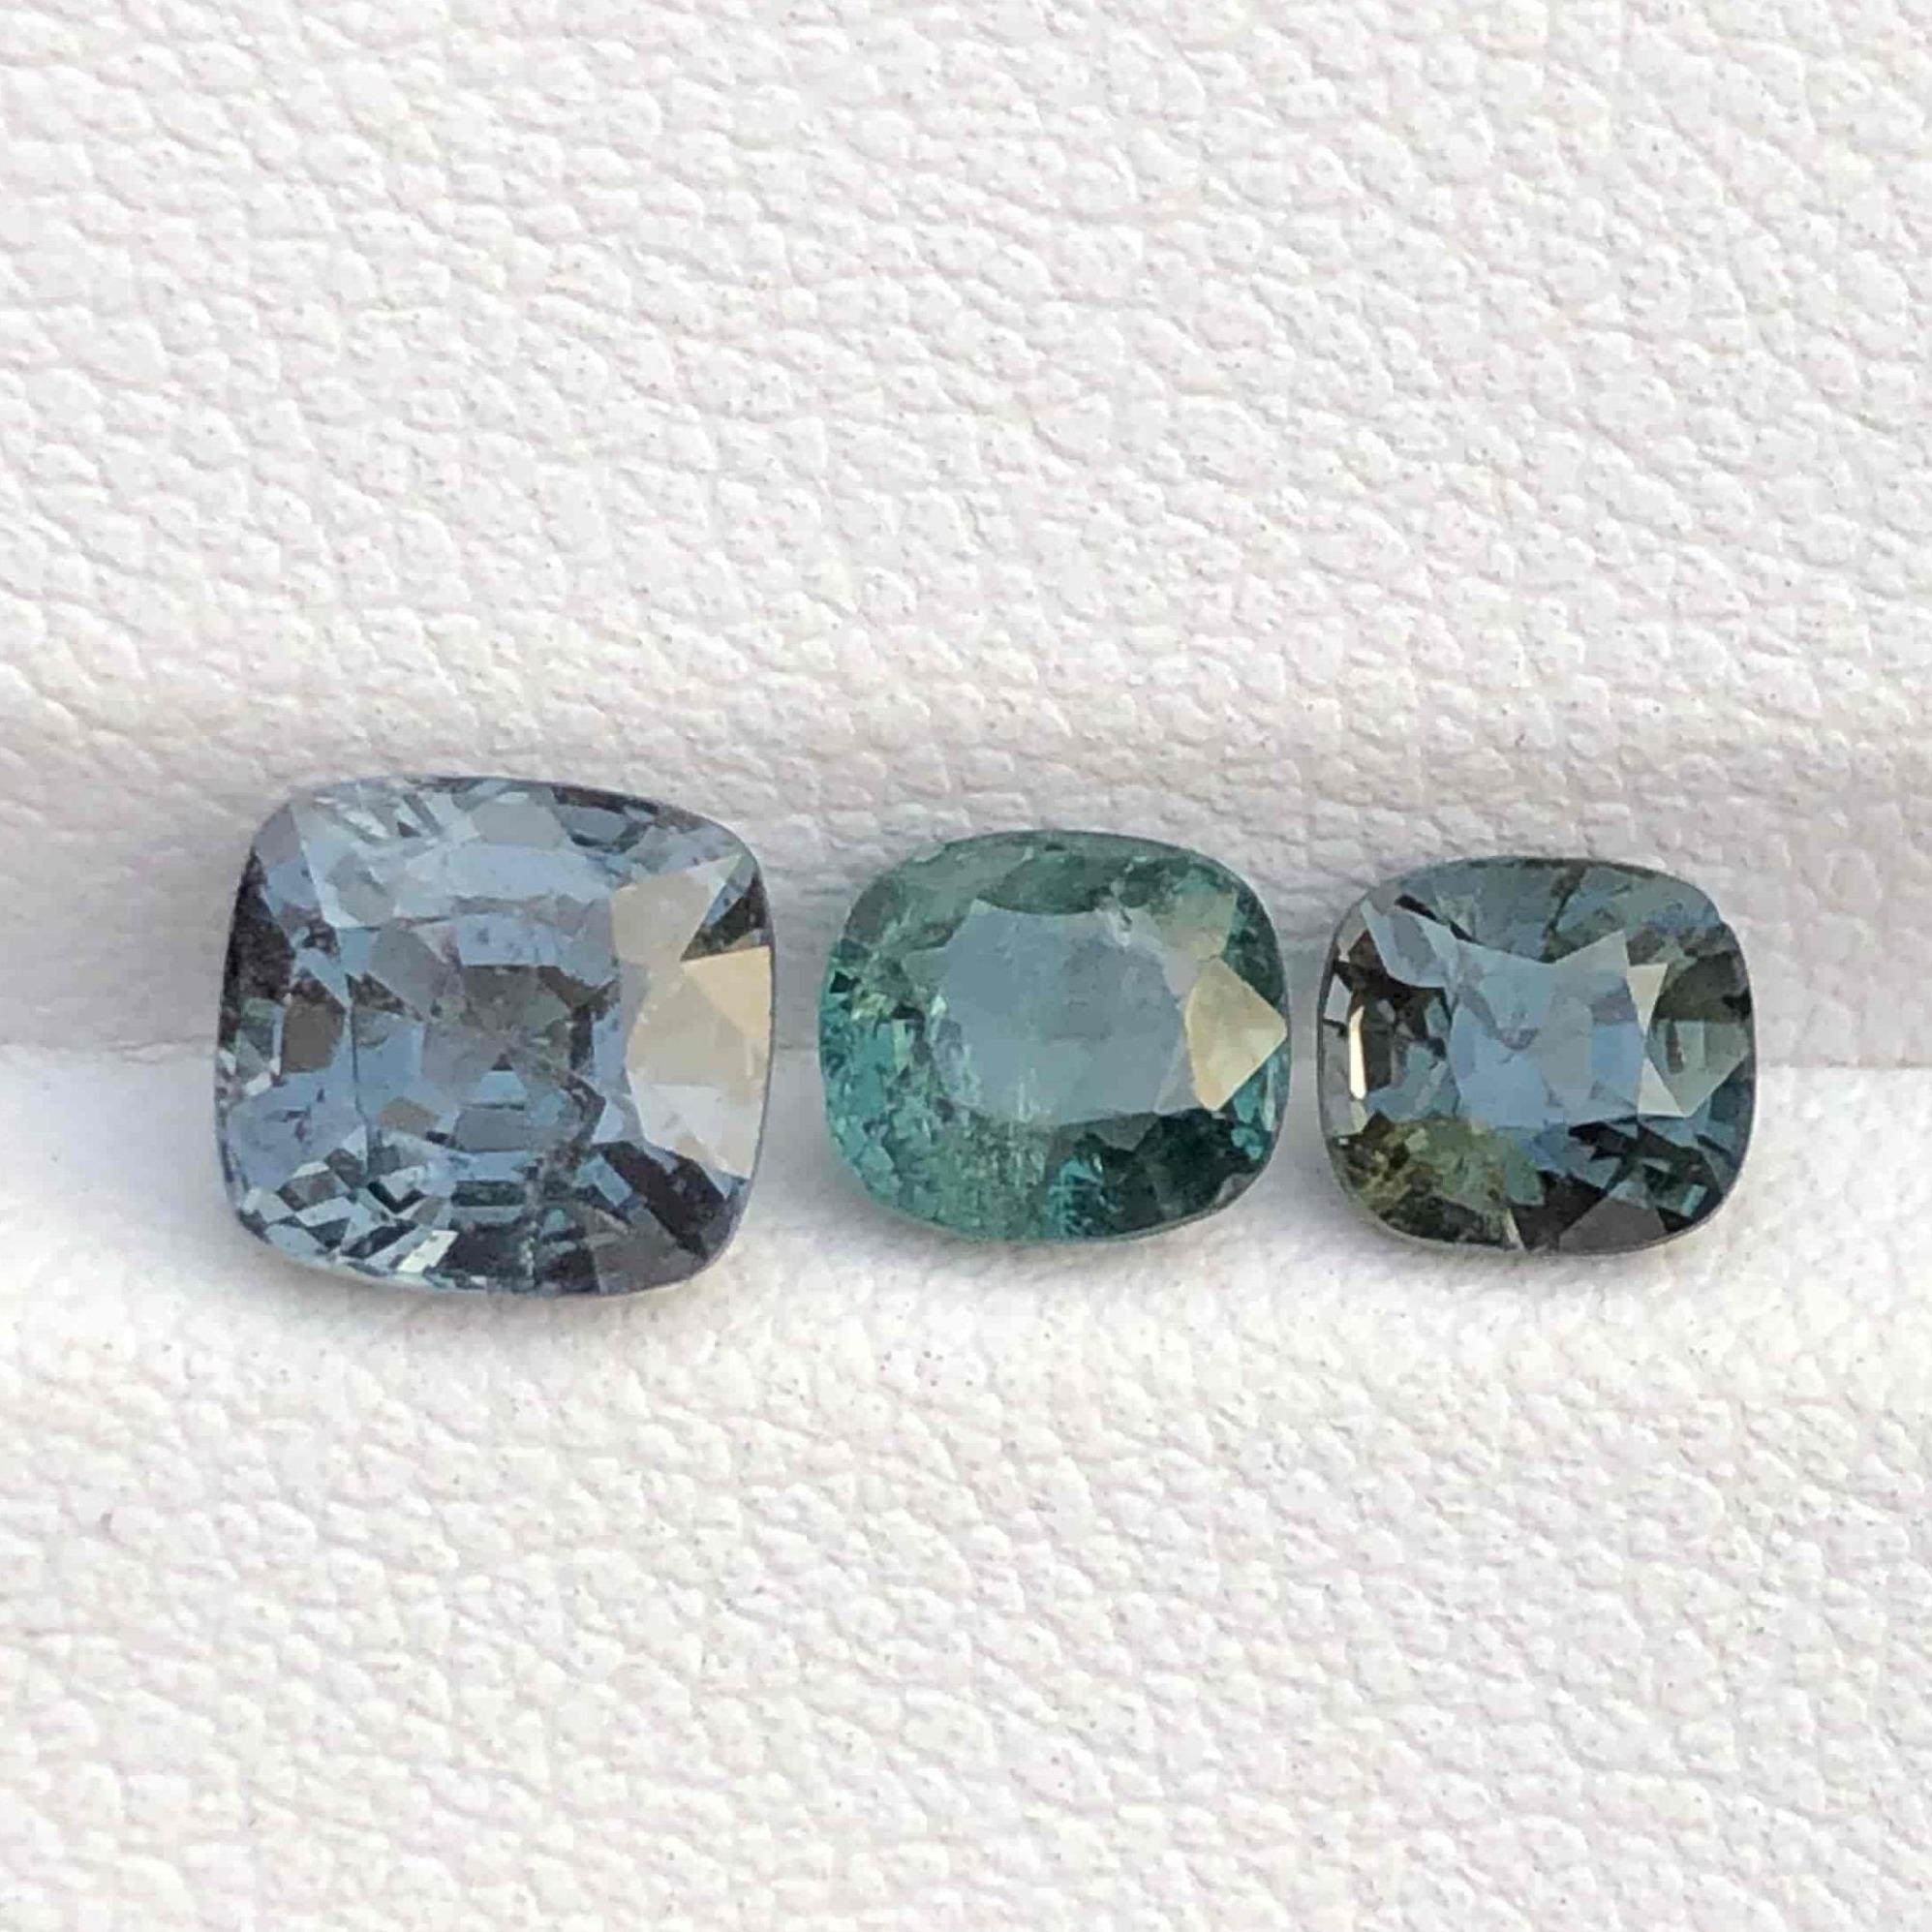 Gemstone Type Natural Gray Spinel Batch
Weight 3.64 carats
Individual Weight 1.70, 1.05 and 0.85 carats
Dimensions 6.9 x 6.4 x 4.8, 5.9 x 5.2 x 3.8, 5.5 x 5.1 x 3.9 mm
Clarity Slightly Included (SI)
Origin Burma
Treatment None





Introducing a